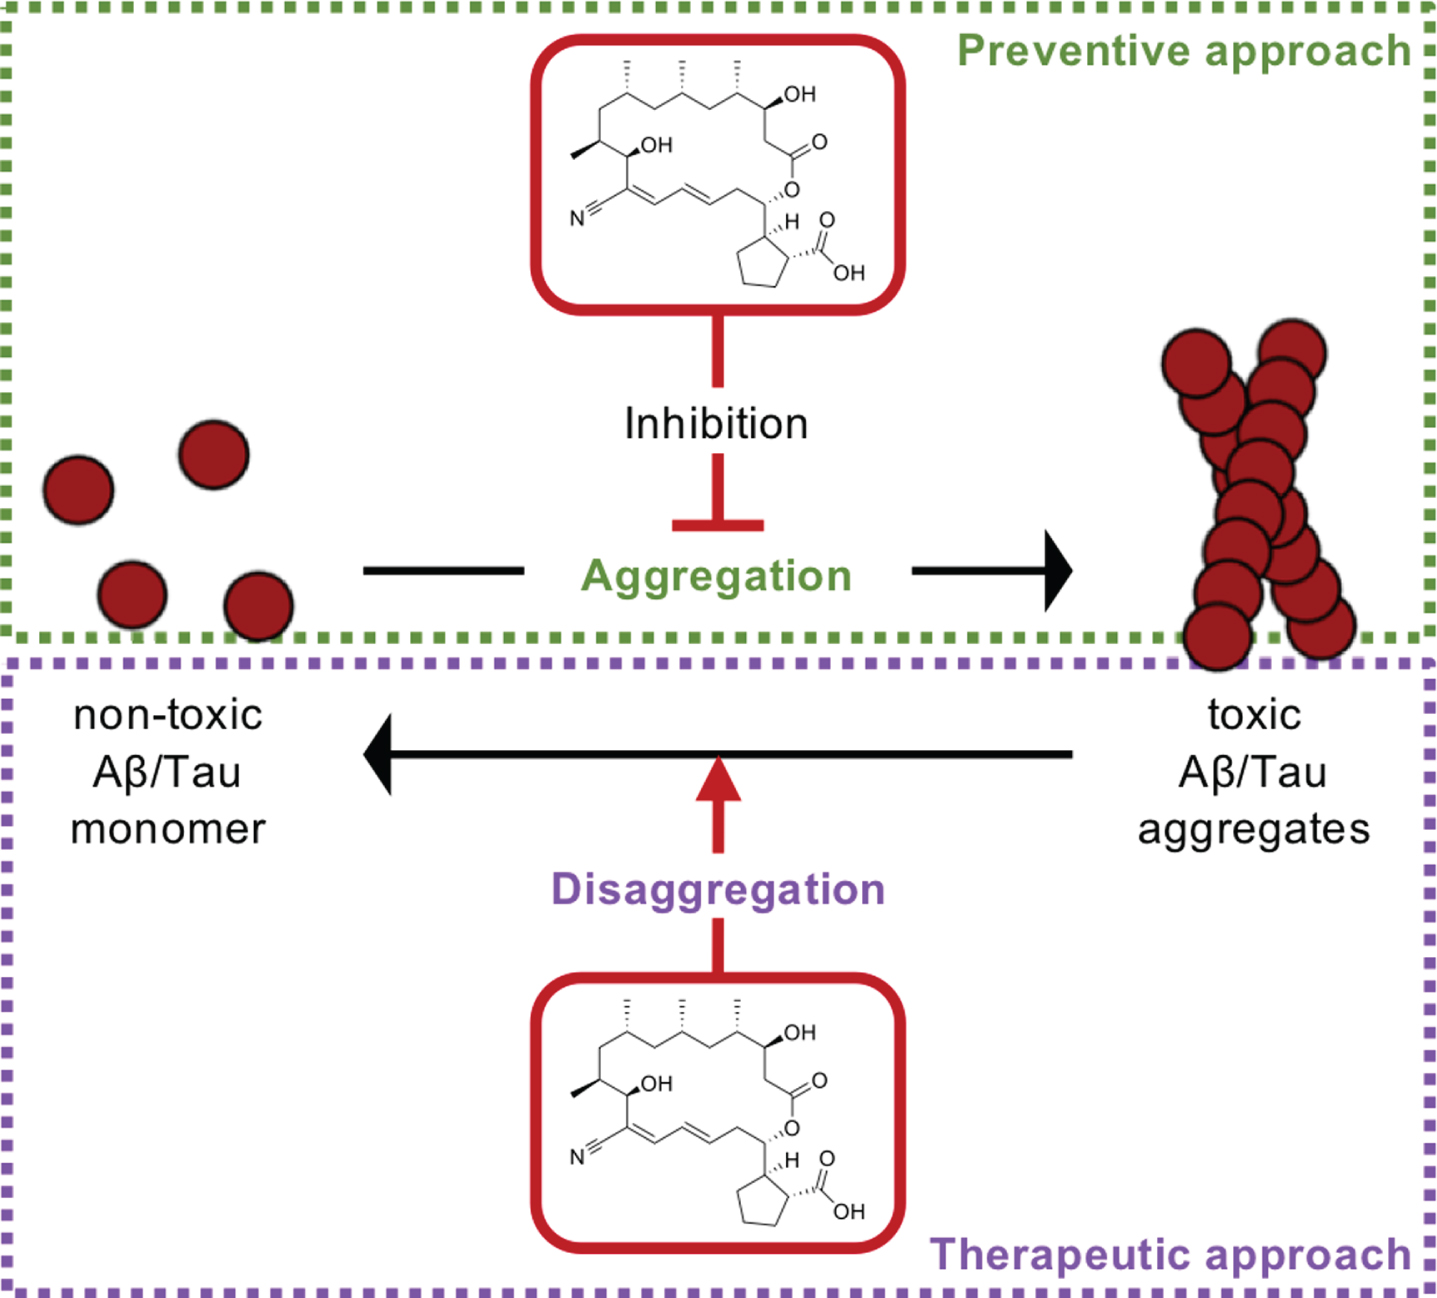 The mechanism of action of borrelidin. The inhibition of the aggregation of both protein aggregates and dissociates toxic aggregates by borrelidin.